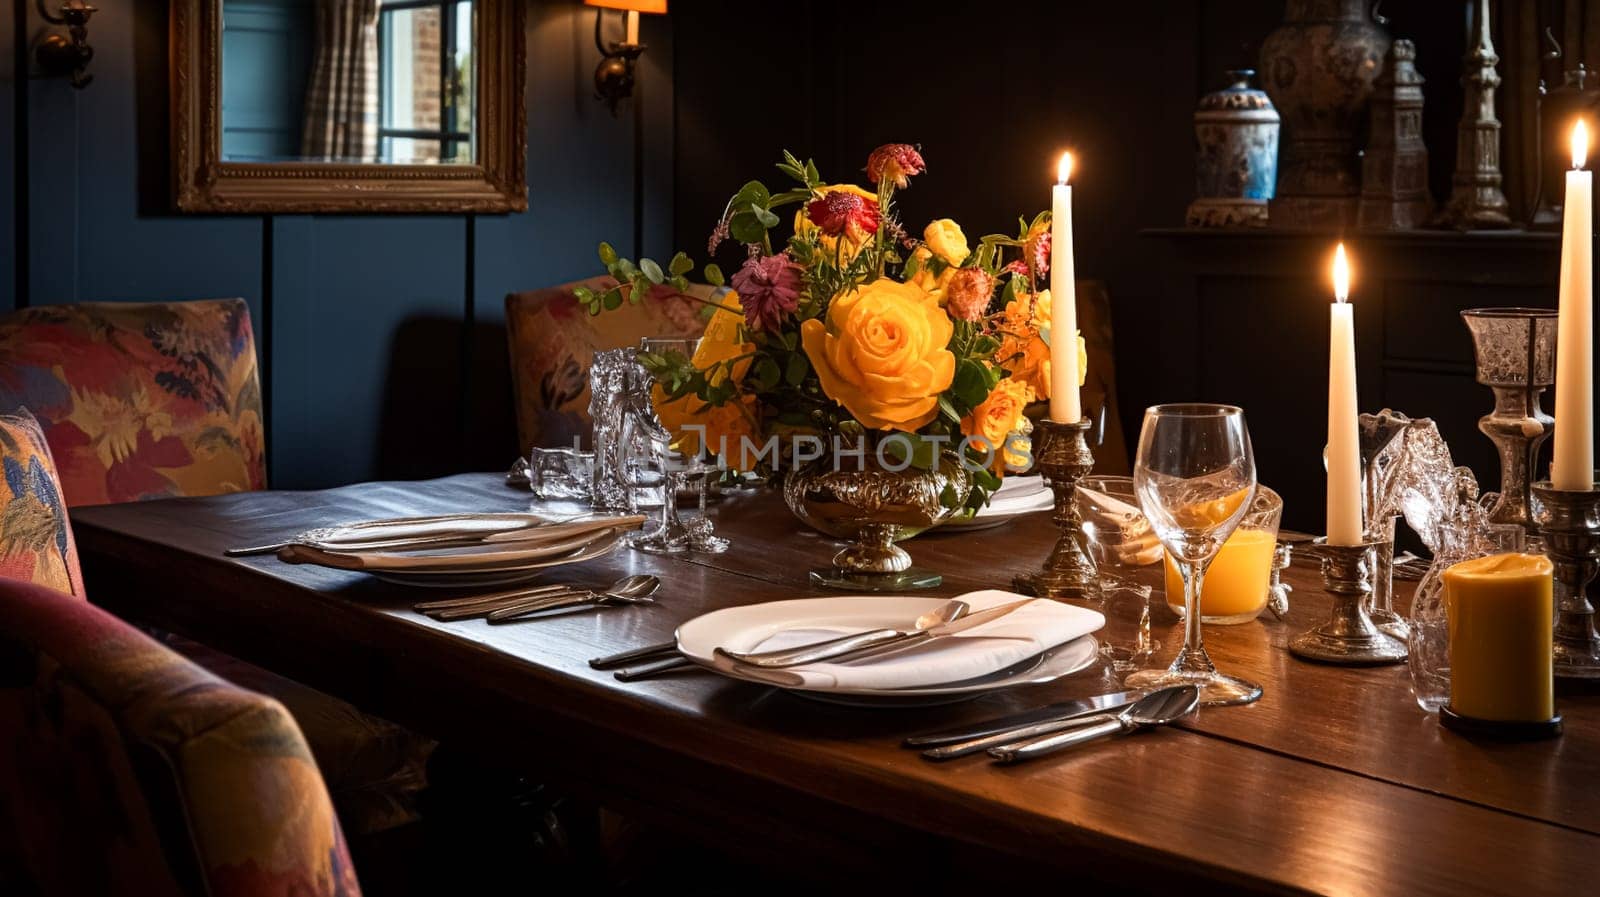 Holiday celebration table decor, festive tablescape in dining room, candles and flowers decoration for formal family dinner in the English country house, countryside interior design motif